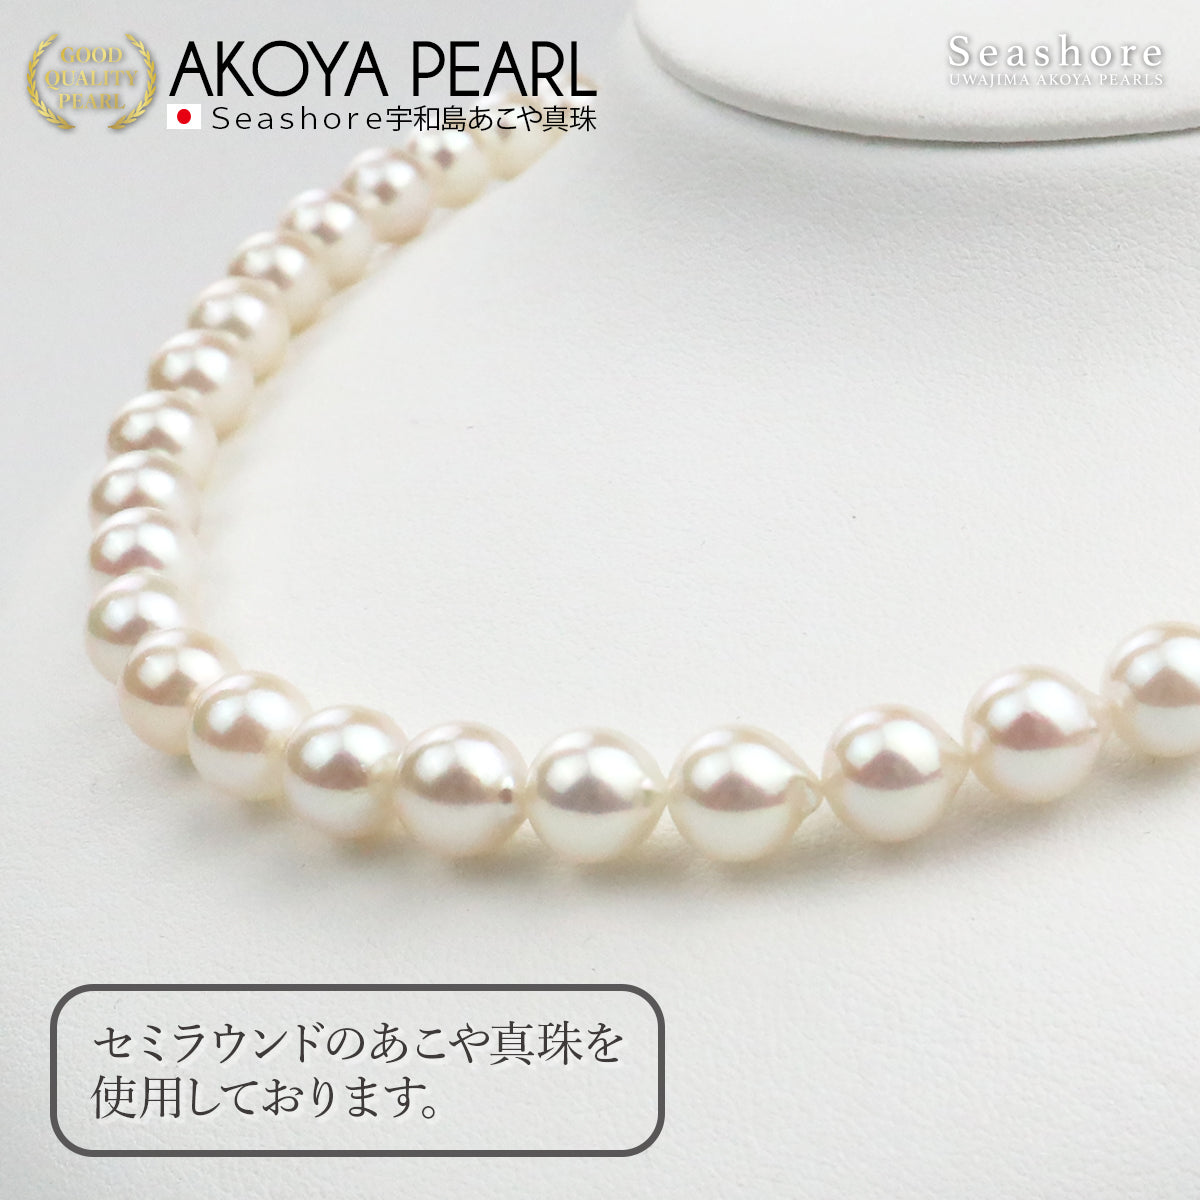 Akoya Pearl Formal Necklace Set of 2 [8.0-8.5mm] (Earrings included) Formal Set with Certificate of Authenticity and Storage Case [TV Shopping]